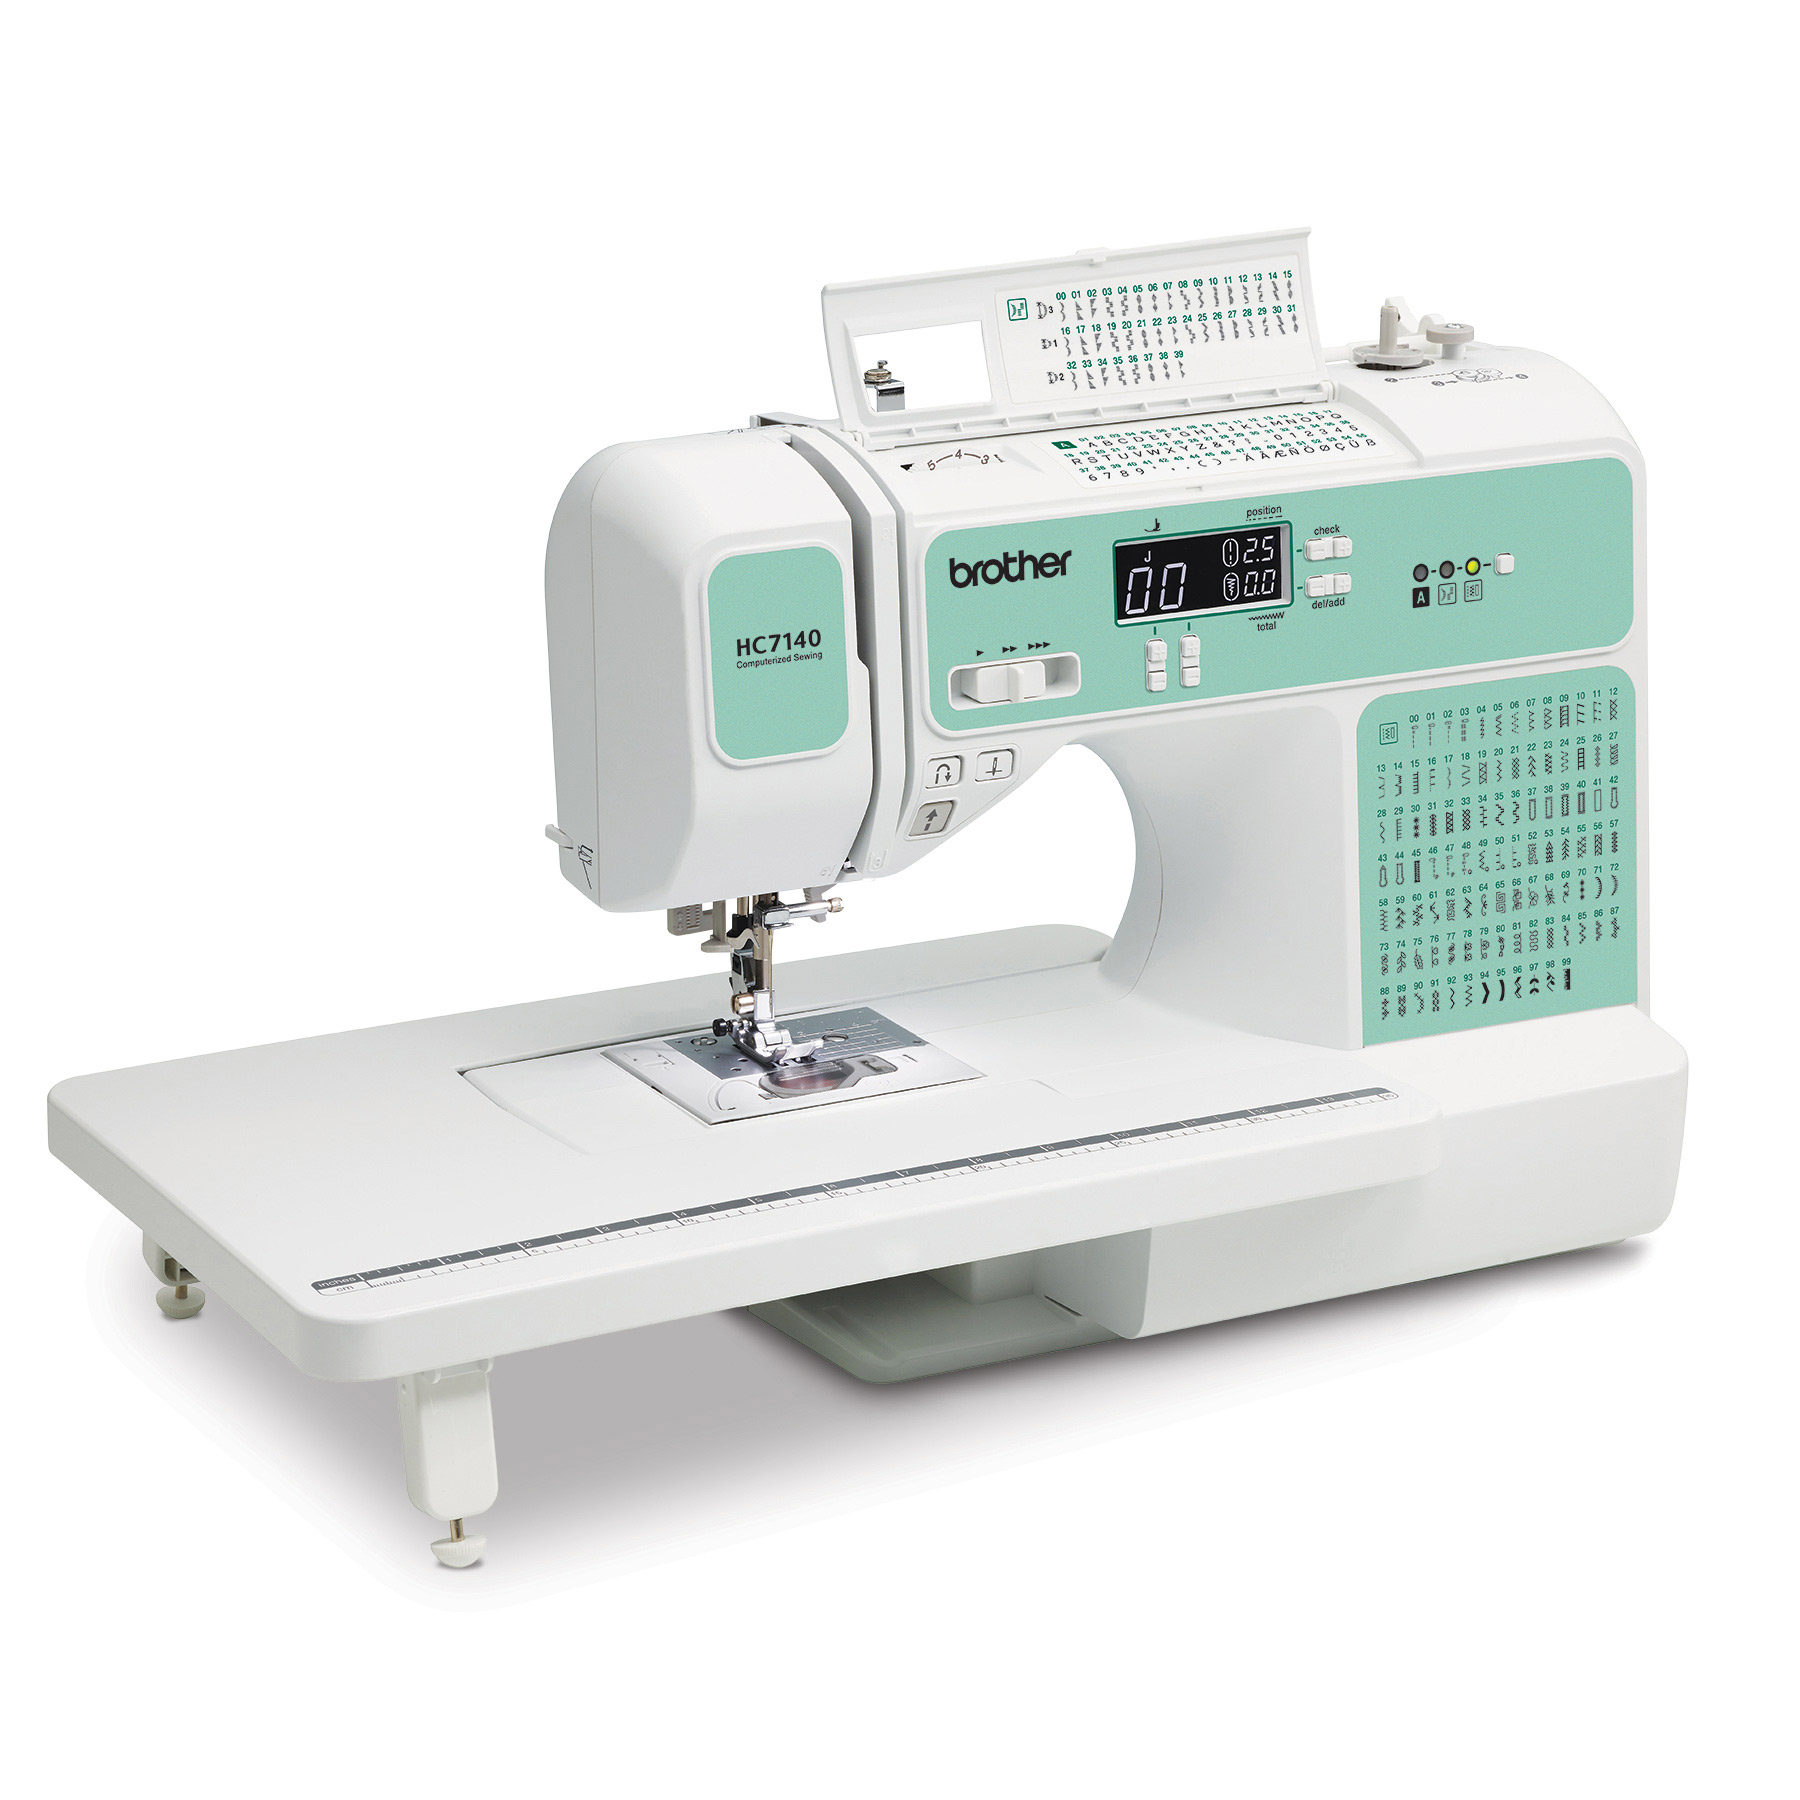 Image of Brother RHC7140 Refurbished Computerized Sewing & Quilting Machine